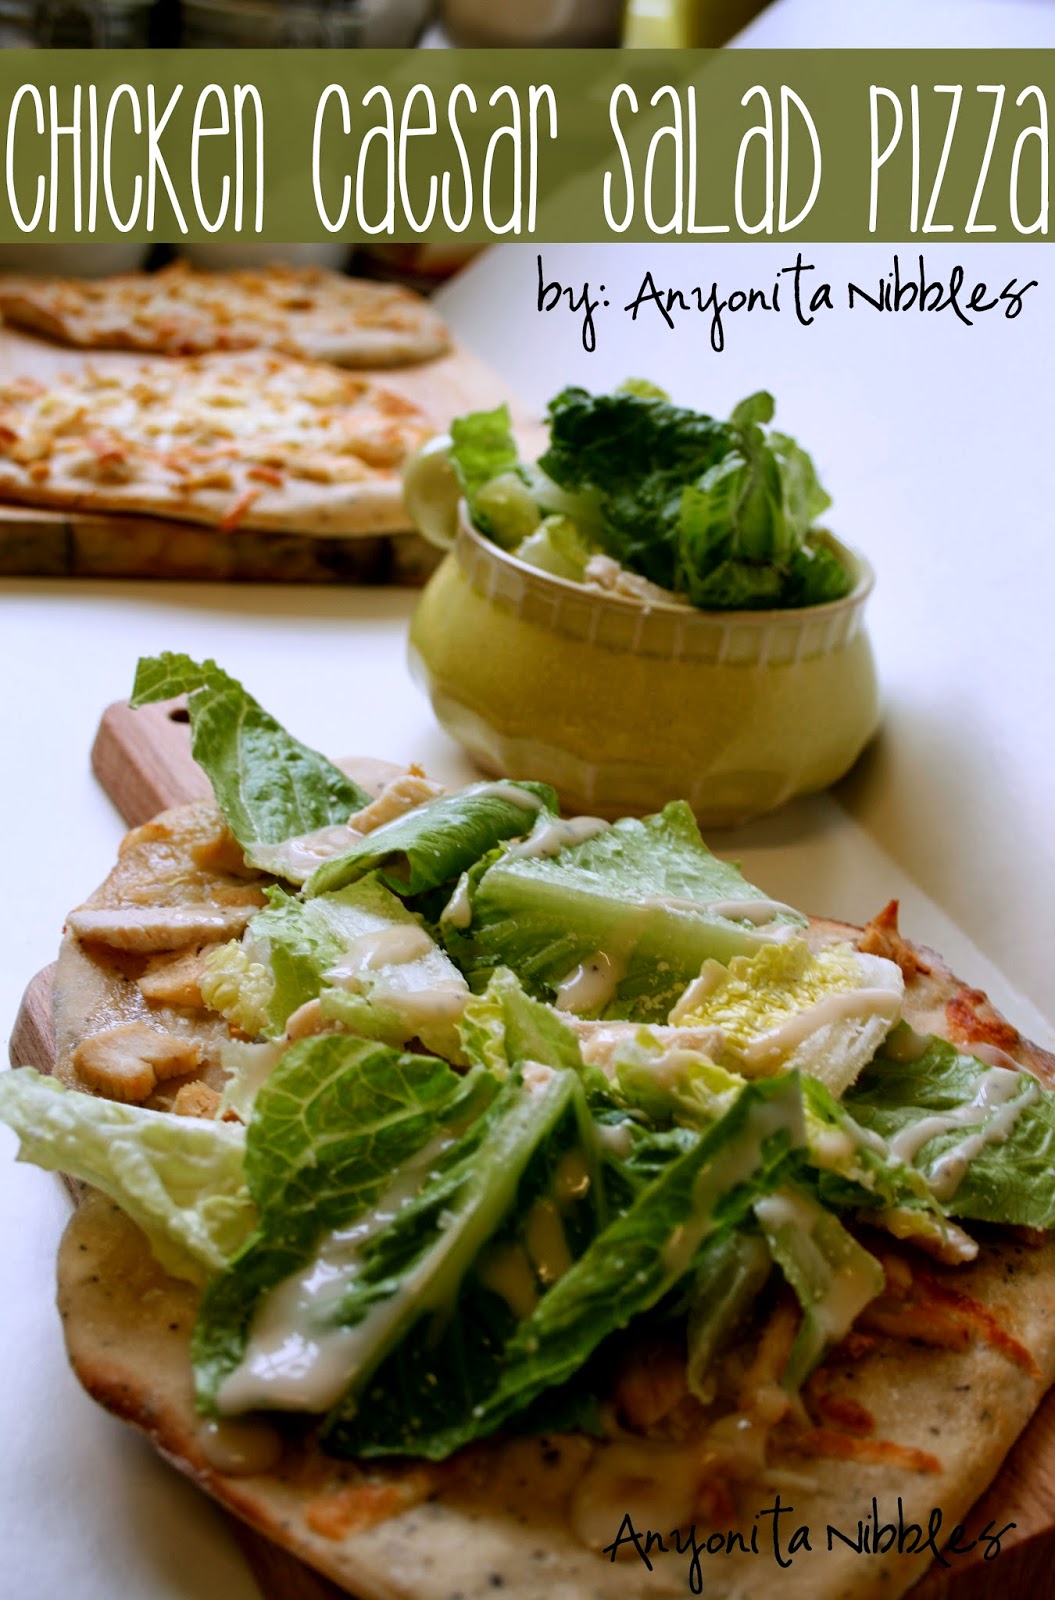 Keep your diet on track and still enjoy pizza with this chicken caesar salad pizza | Anyonita Nibbles